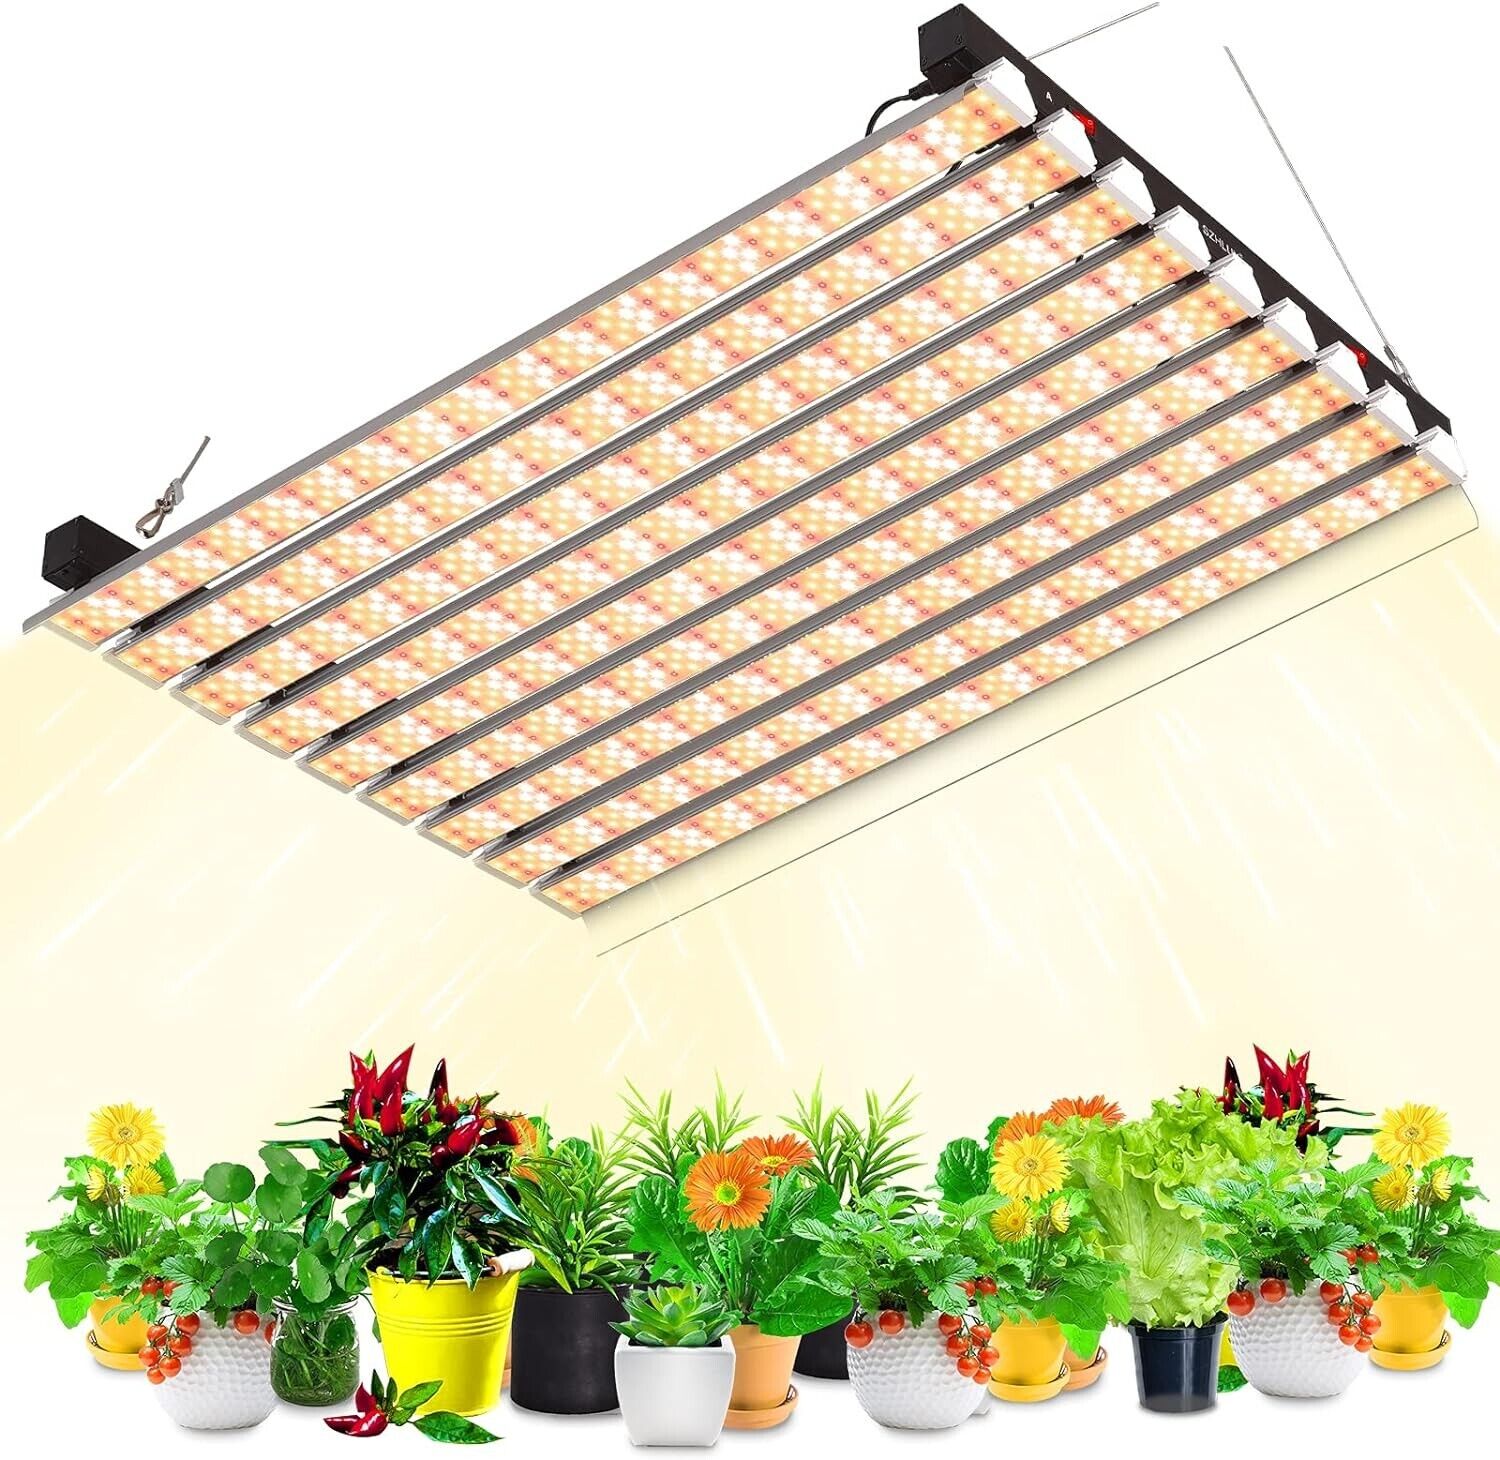 6000W LED Grow Light 4×6FT Coverage Dual Switch Full Spectrum Grow Lamp Plants